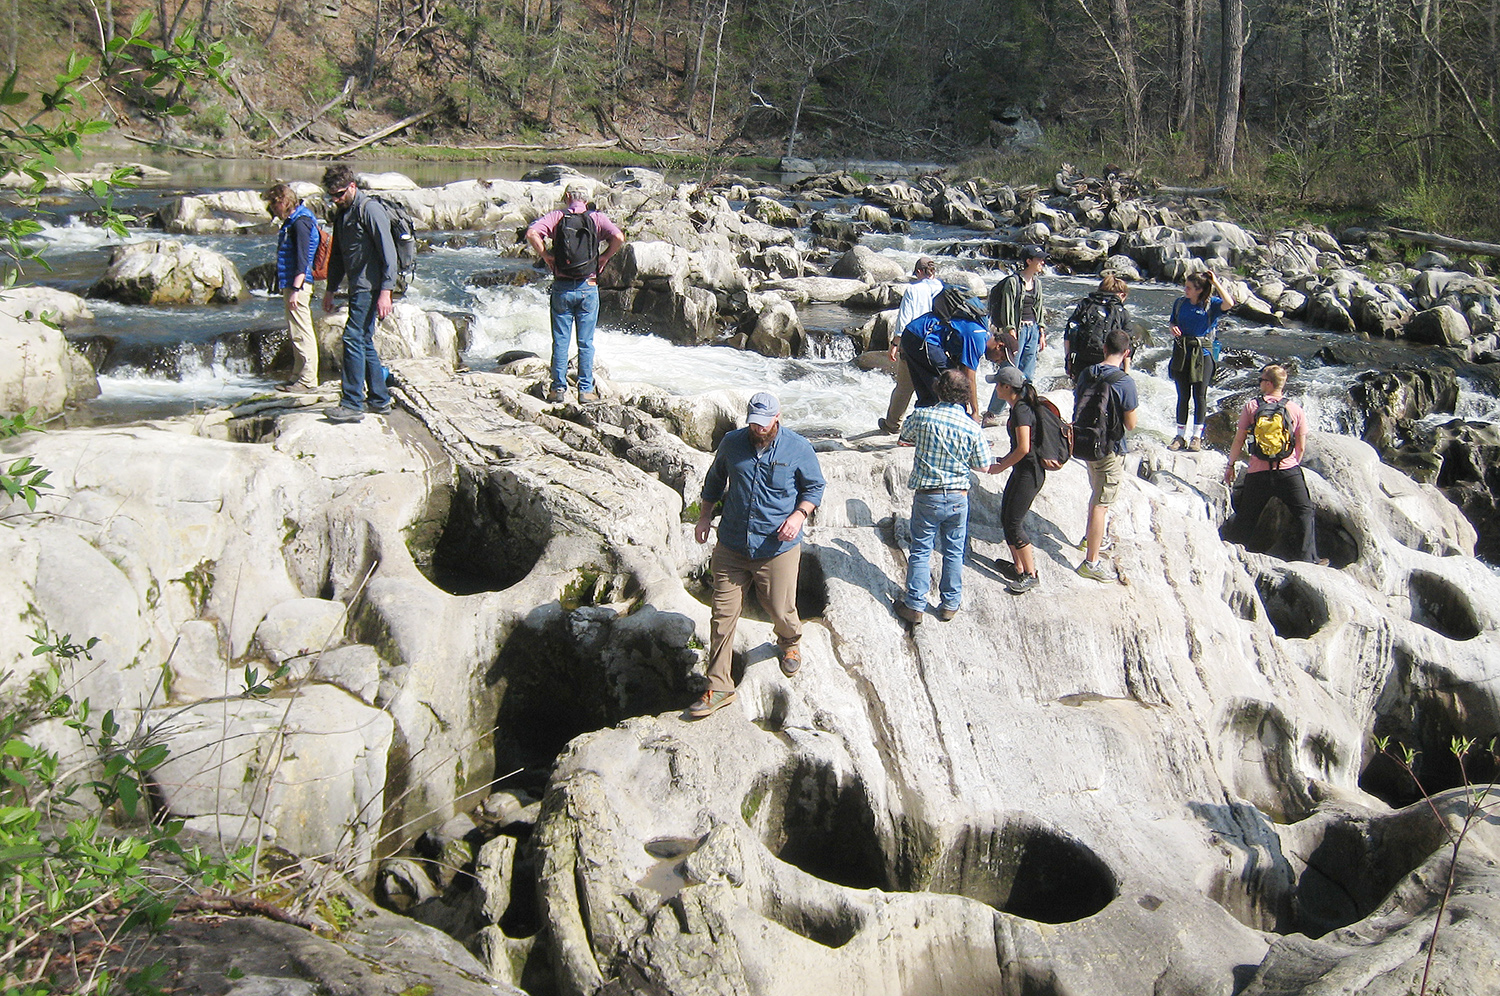 During the Keck Geology Consortium Symposium, participants explored the Bulls Bridge area in Kent, Conn. to learn about the importance of a knickpoint (change in gradient) on the Housatonic River. Participants also examined interesting formations of glacial pot holes.